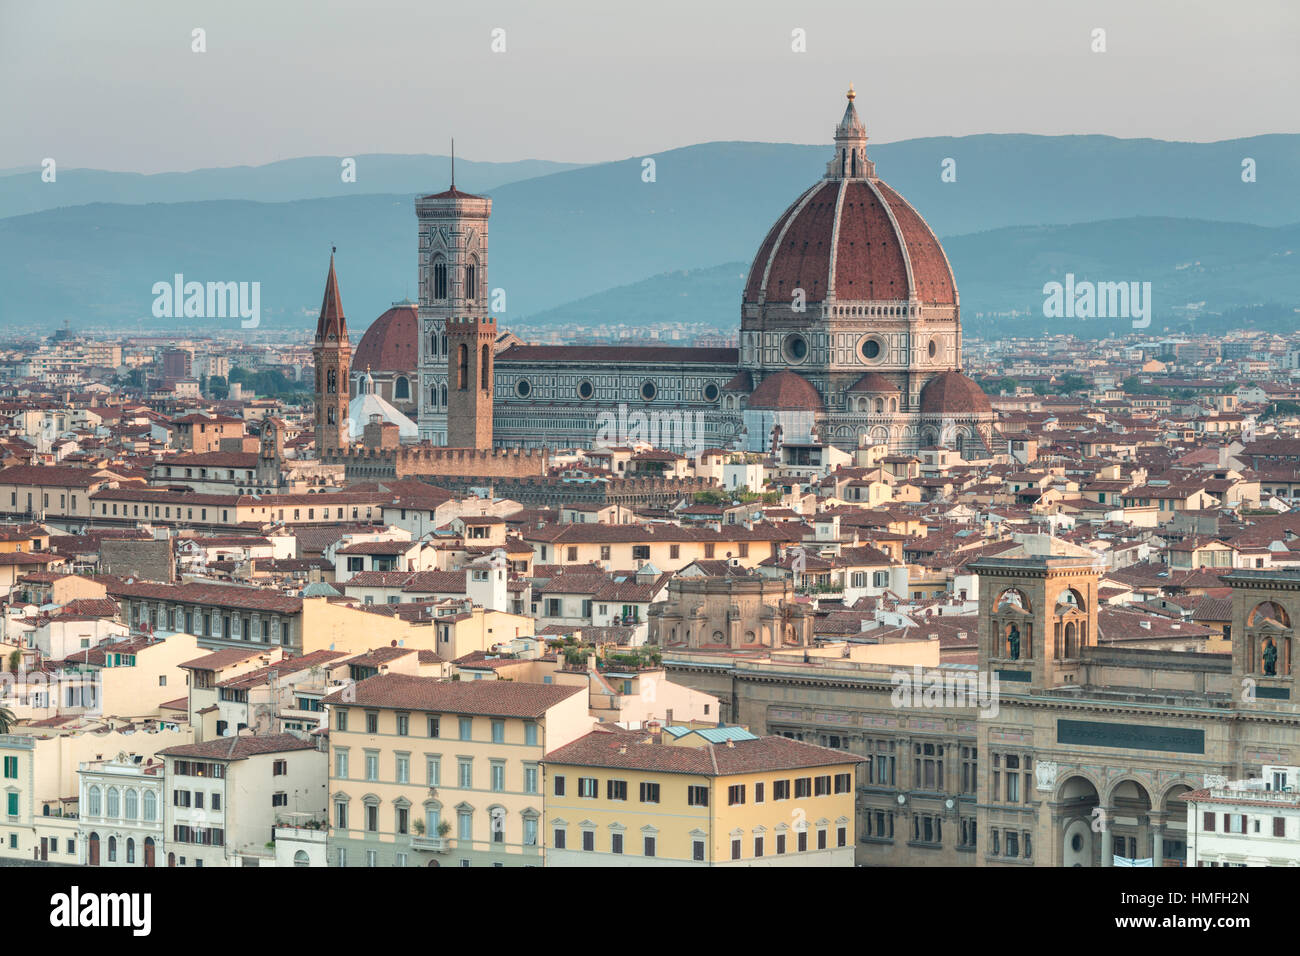 View of the Duomo with Brunelleschi Dome and Basilica di Santa Croce from Piazzale Michelangelo, Florence, Tuscany, Italy Stock Photo